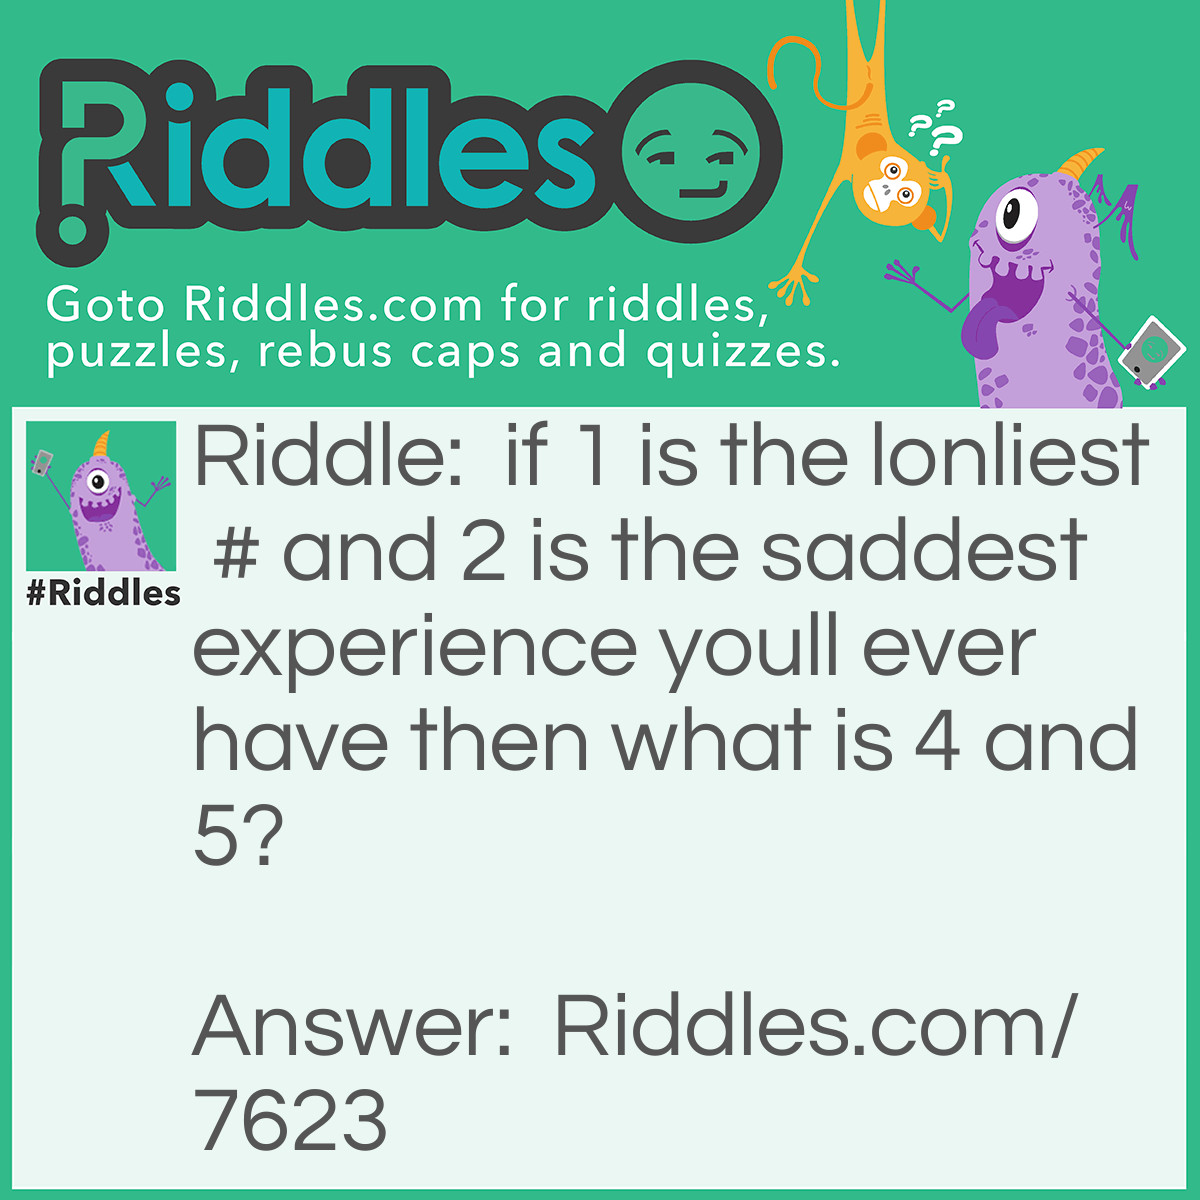 Riddle: if 1 is the lonliest # and 2 is the saddest experience youll ever have then what is 4 and 5? Answer: Nine (4+5=9).